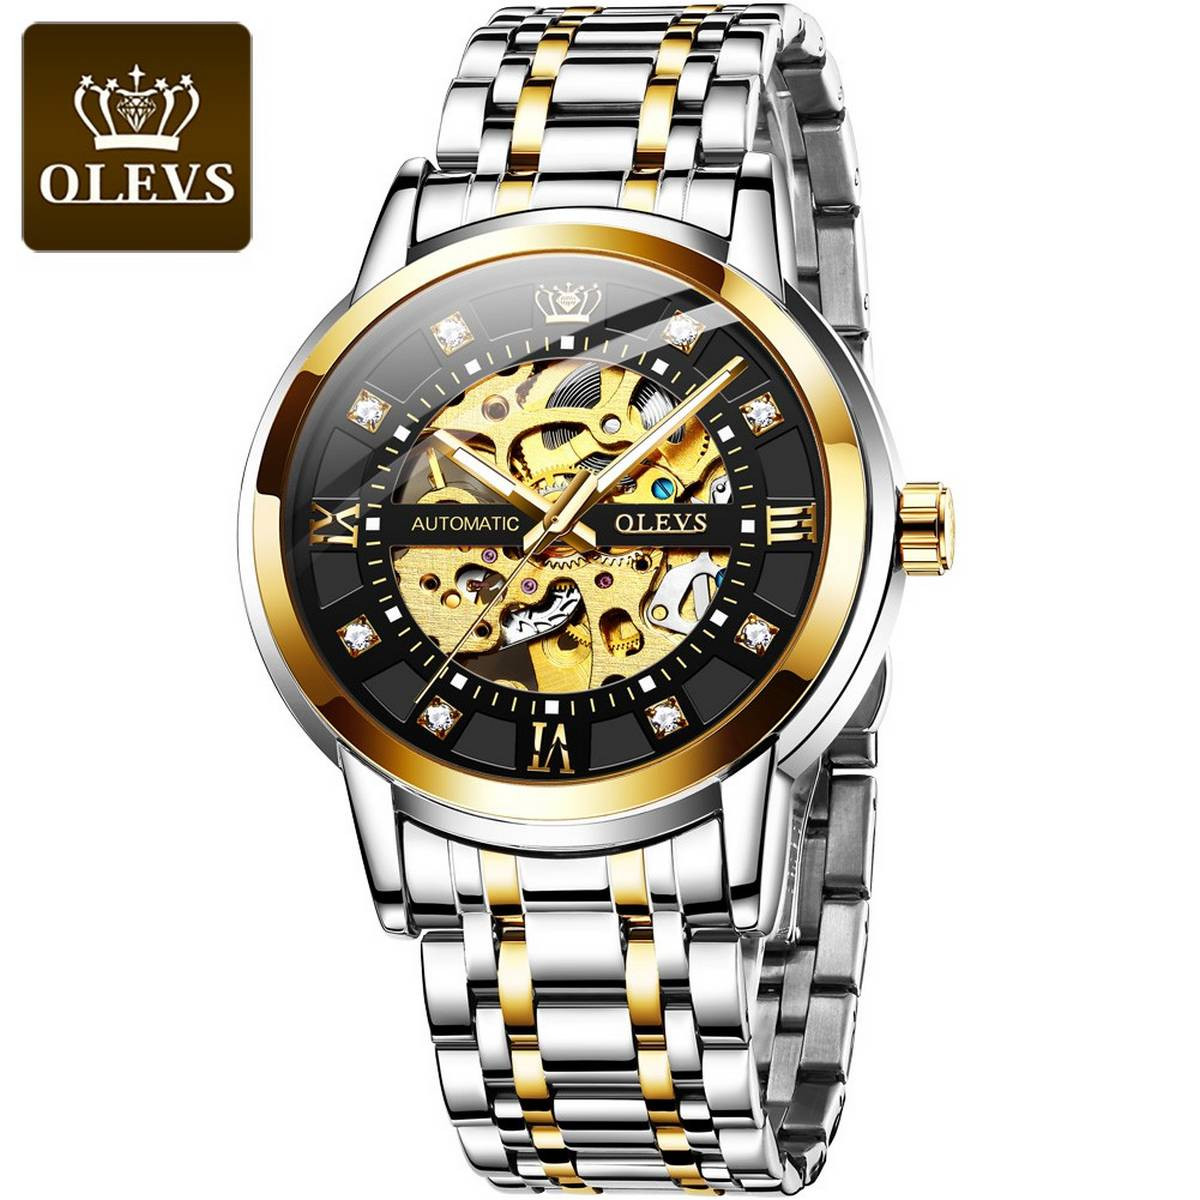 OLEVS 9901 Luxury Hollowing Automatic Mechanical Wristwatch Waterproof Luminous Stainless Steel Fashion Watch for Man's-Black Dial